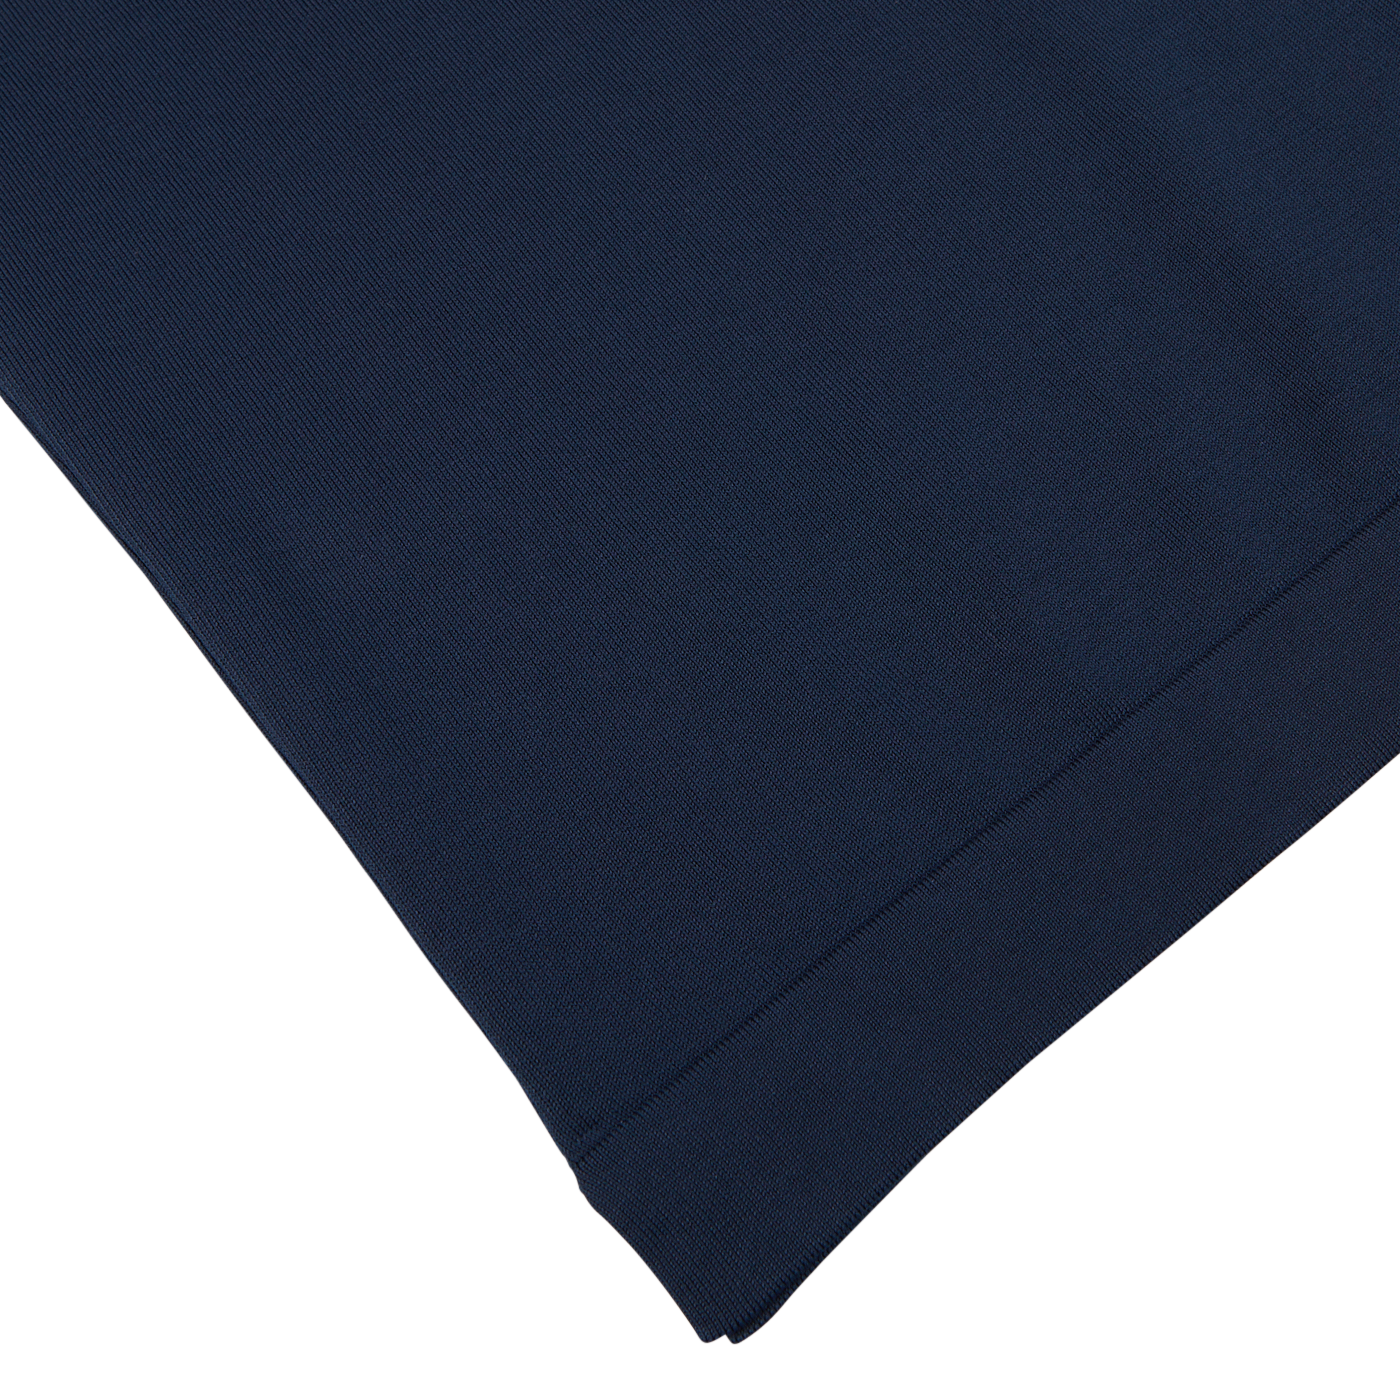 A folded Gran Sasso navy blue organic cotton t-shirt on a white background.